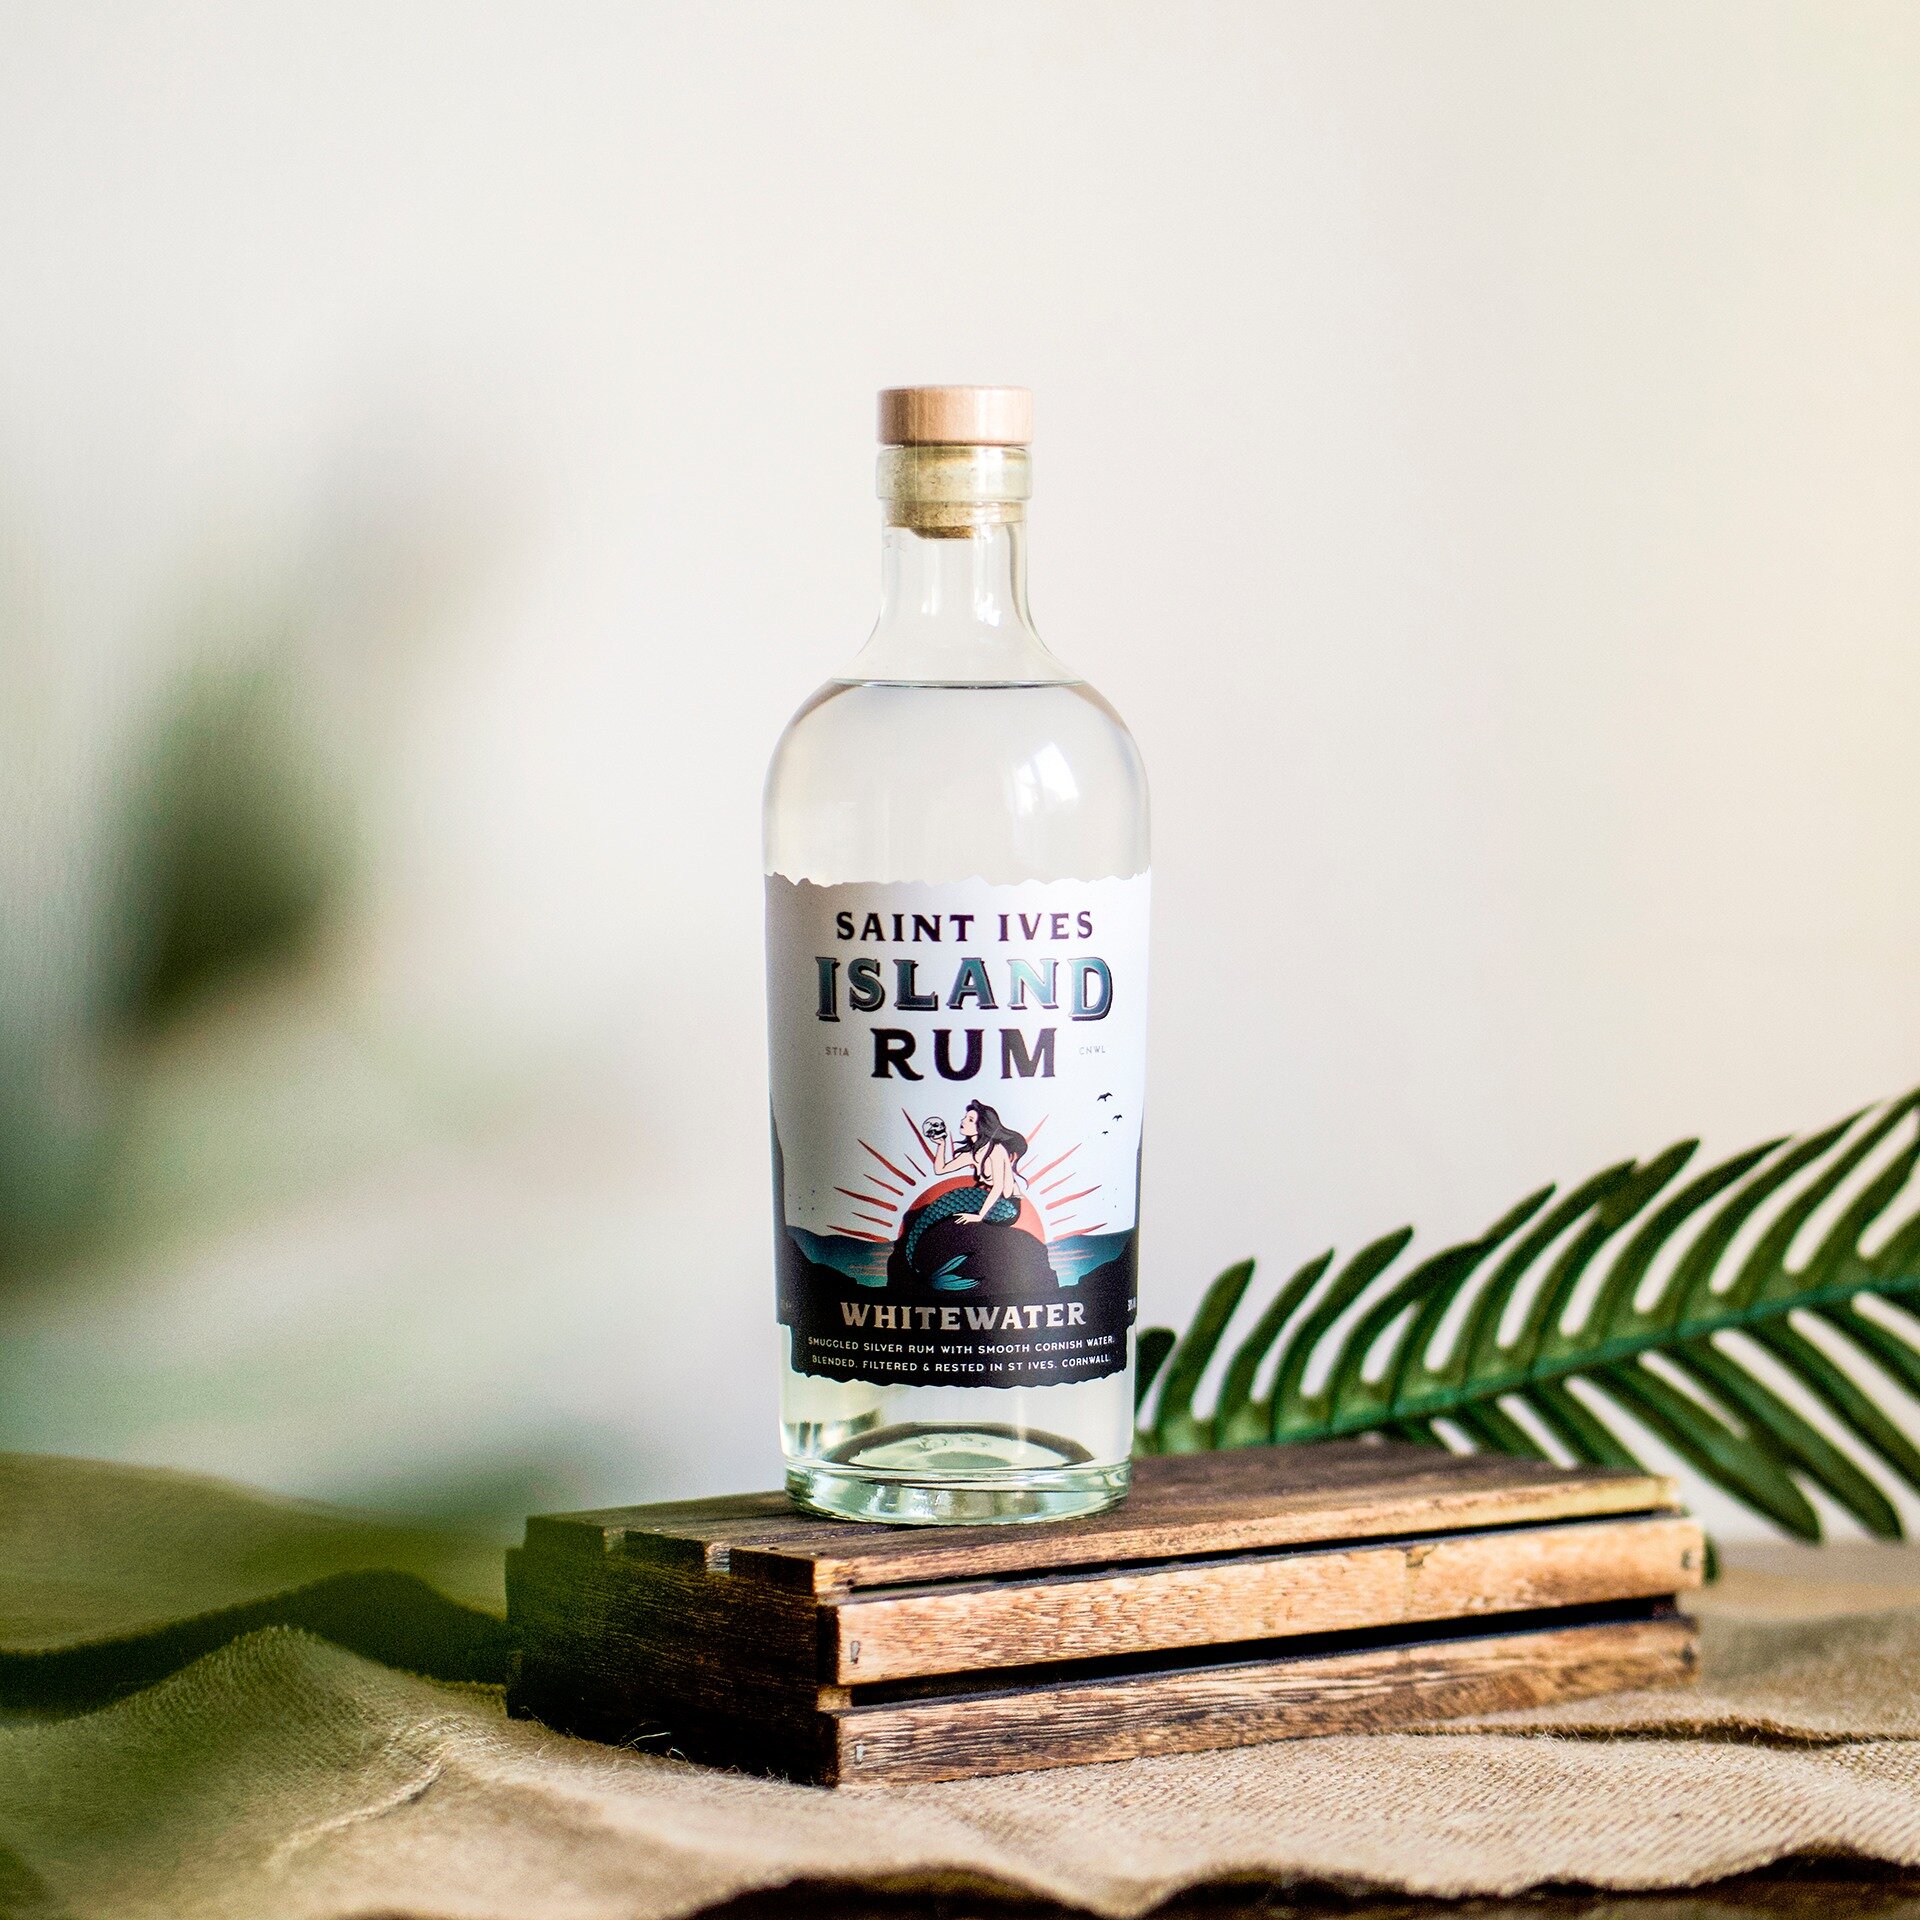 Saint Ives Island Rum is crafted in the heart of St Ives. The Whitewater expression is their silver-style rum, completely un-aged and blended with smooth Cornish water and a pinch of sugar juice. It&rsquo;s light and refreshing with subtle grassy and